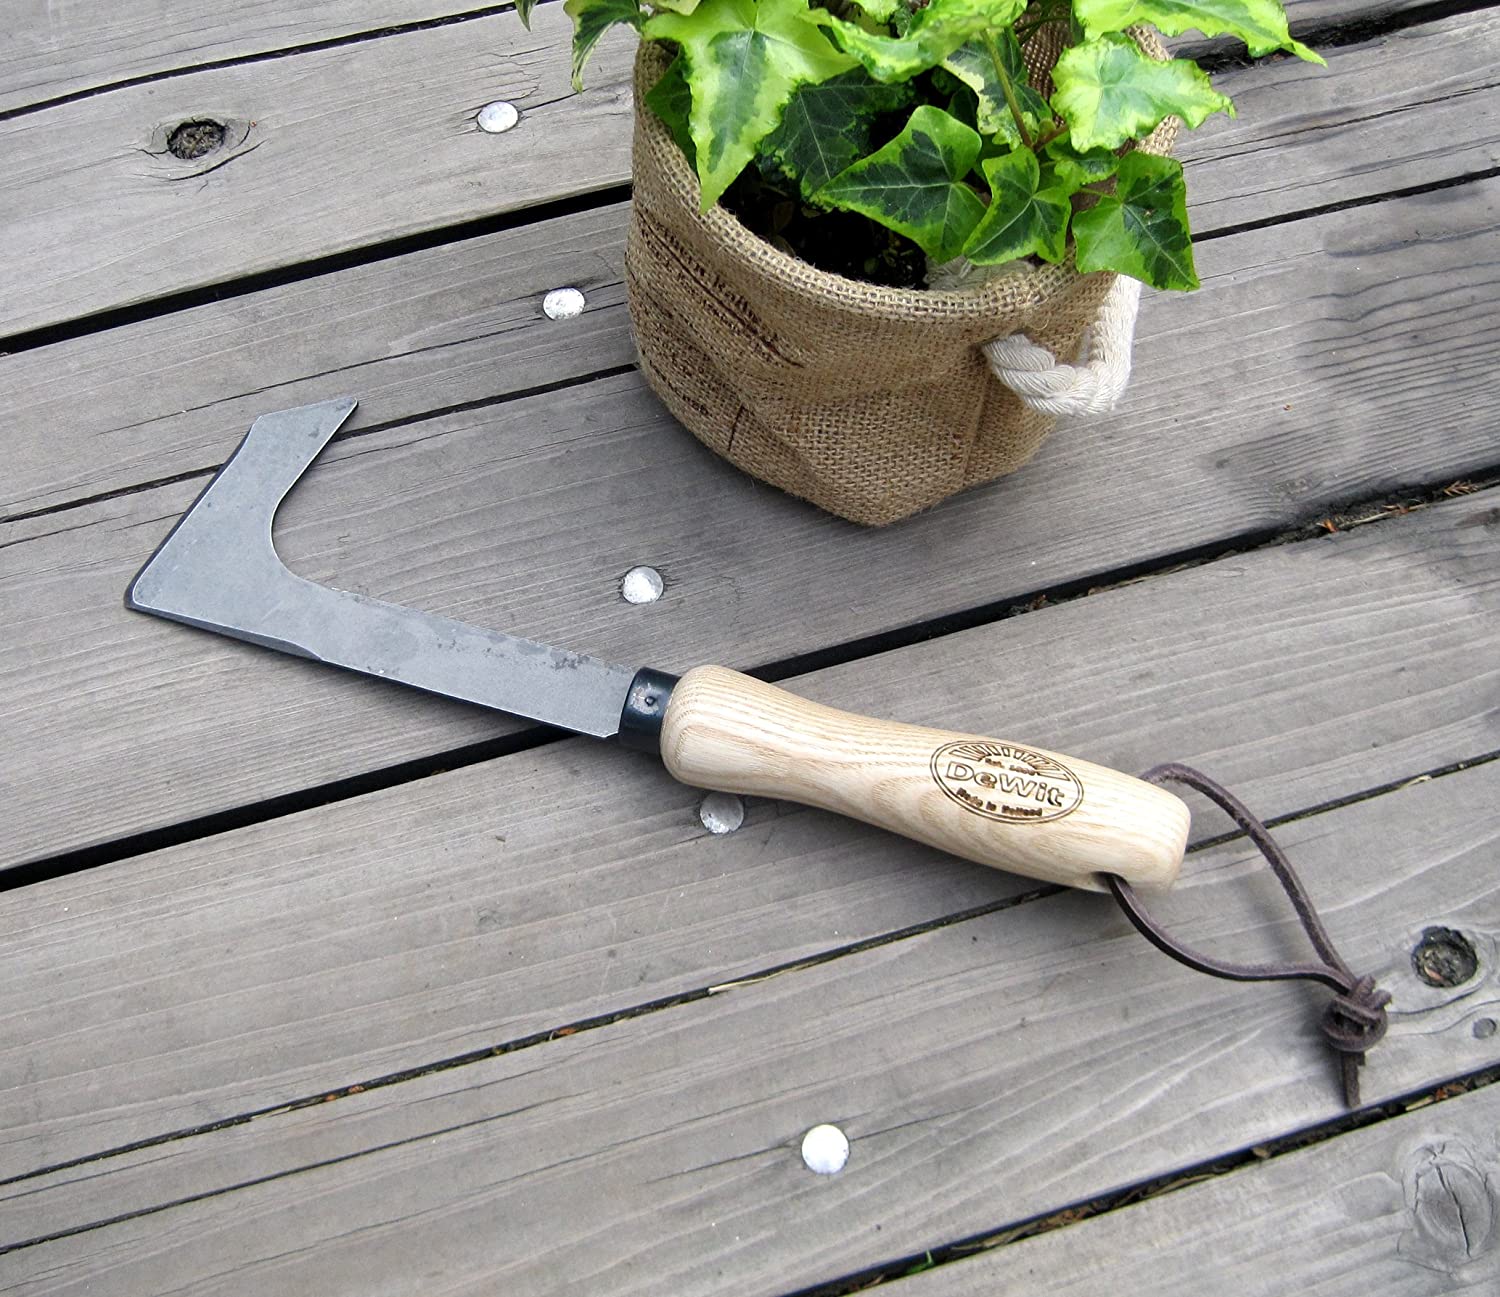 types of garden knives: Patio Knife